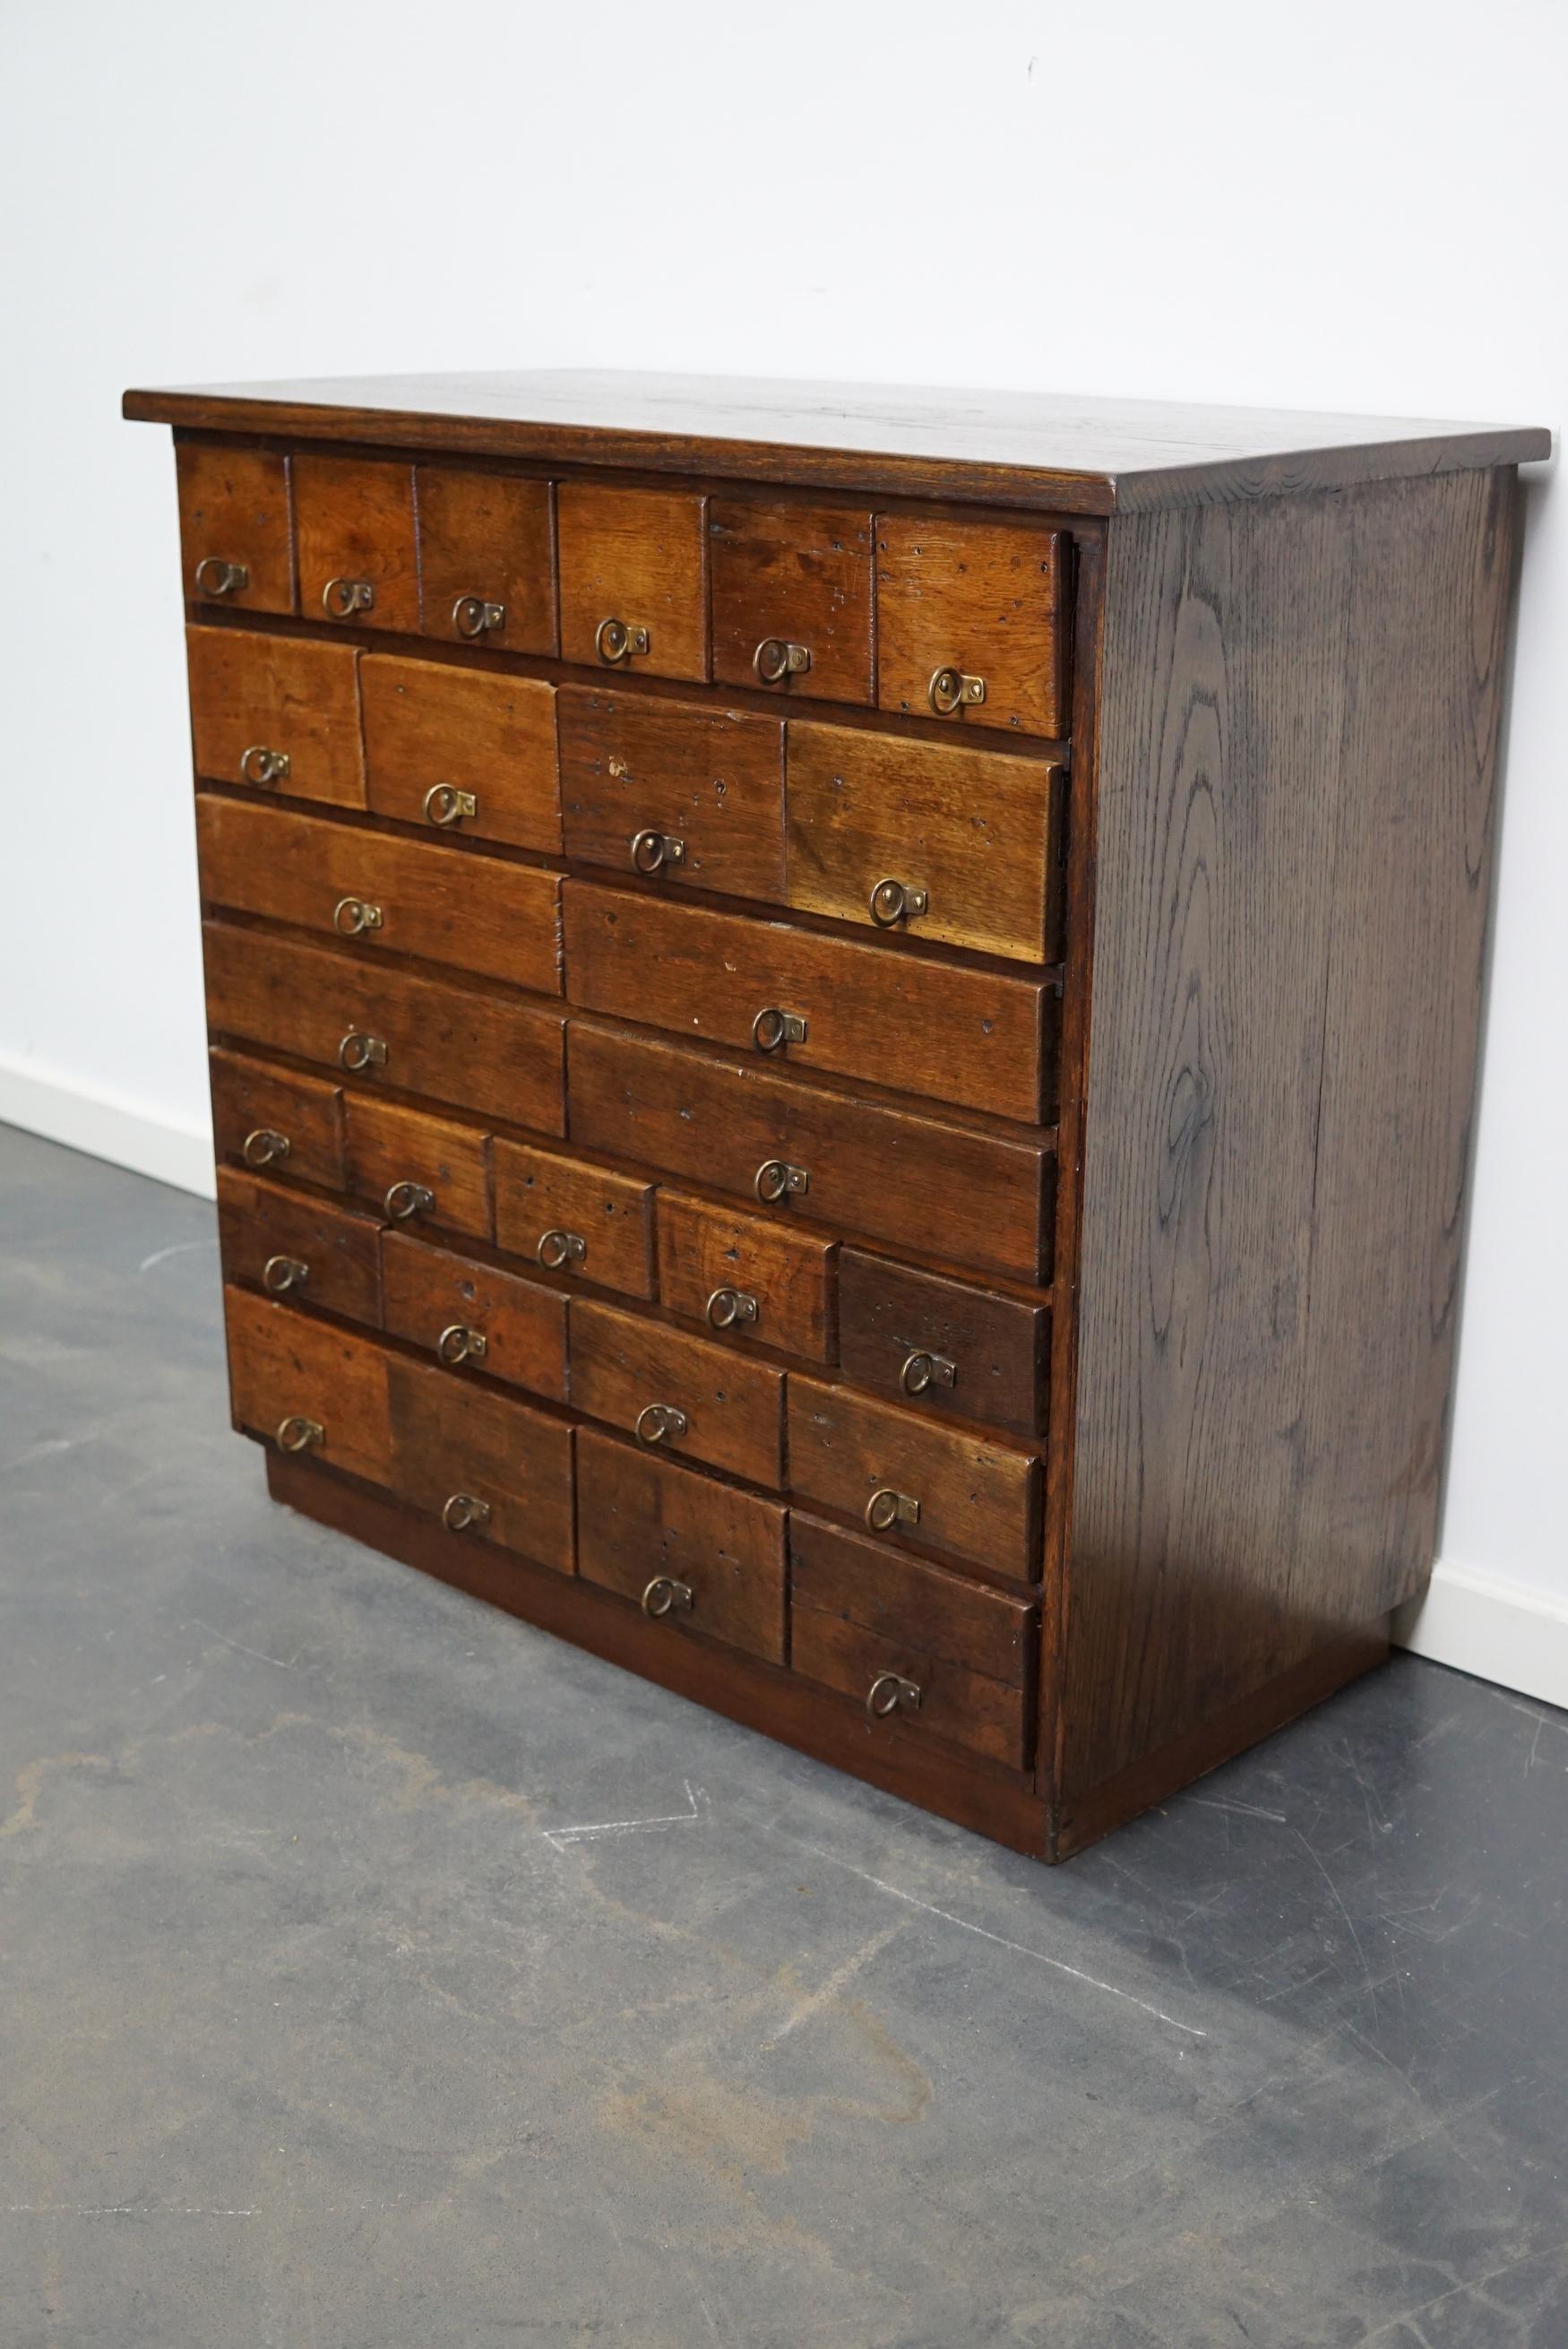 This apothecary cabinet was made circa 1930s in Germany and was later used in a hardware store in Belgium until recently. It features many drawers in different sizes with metal handles.